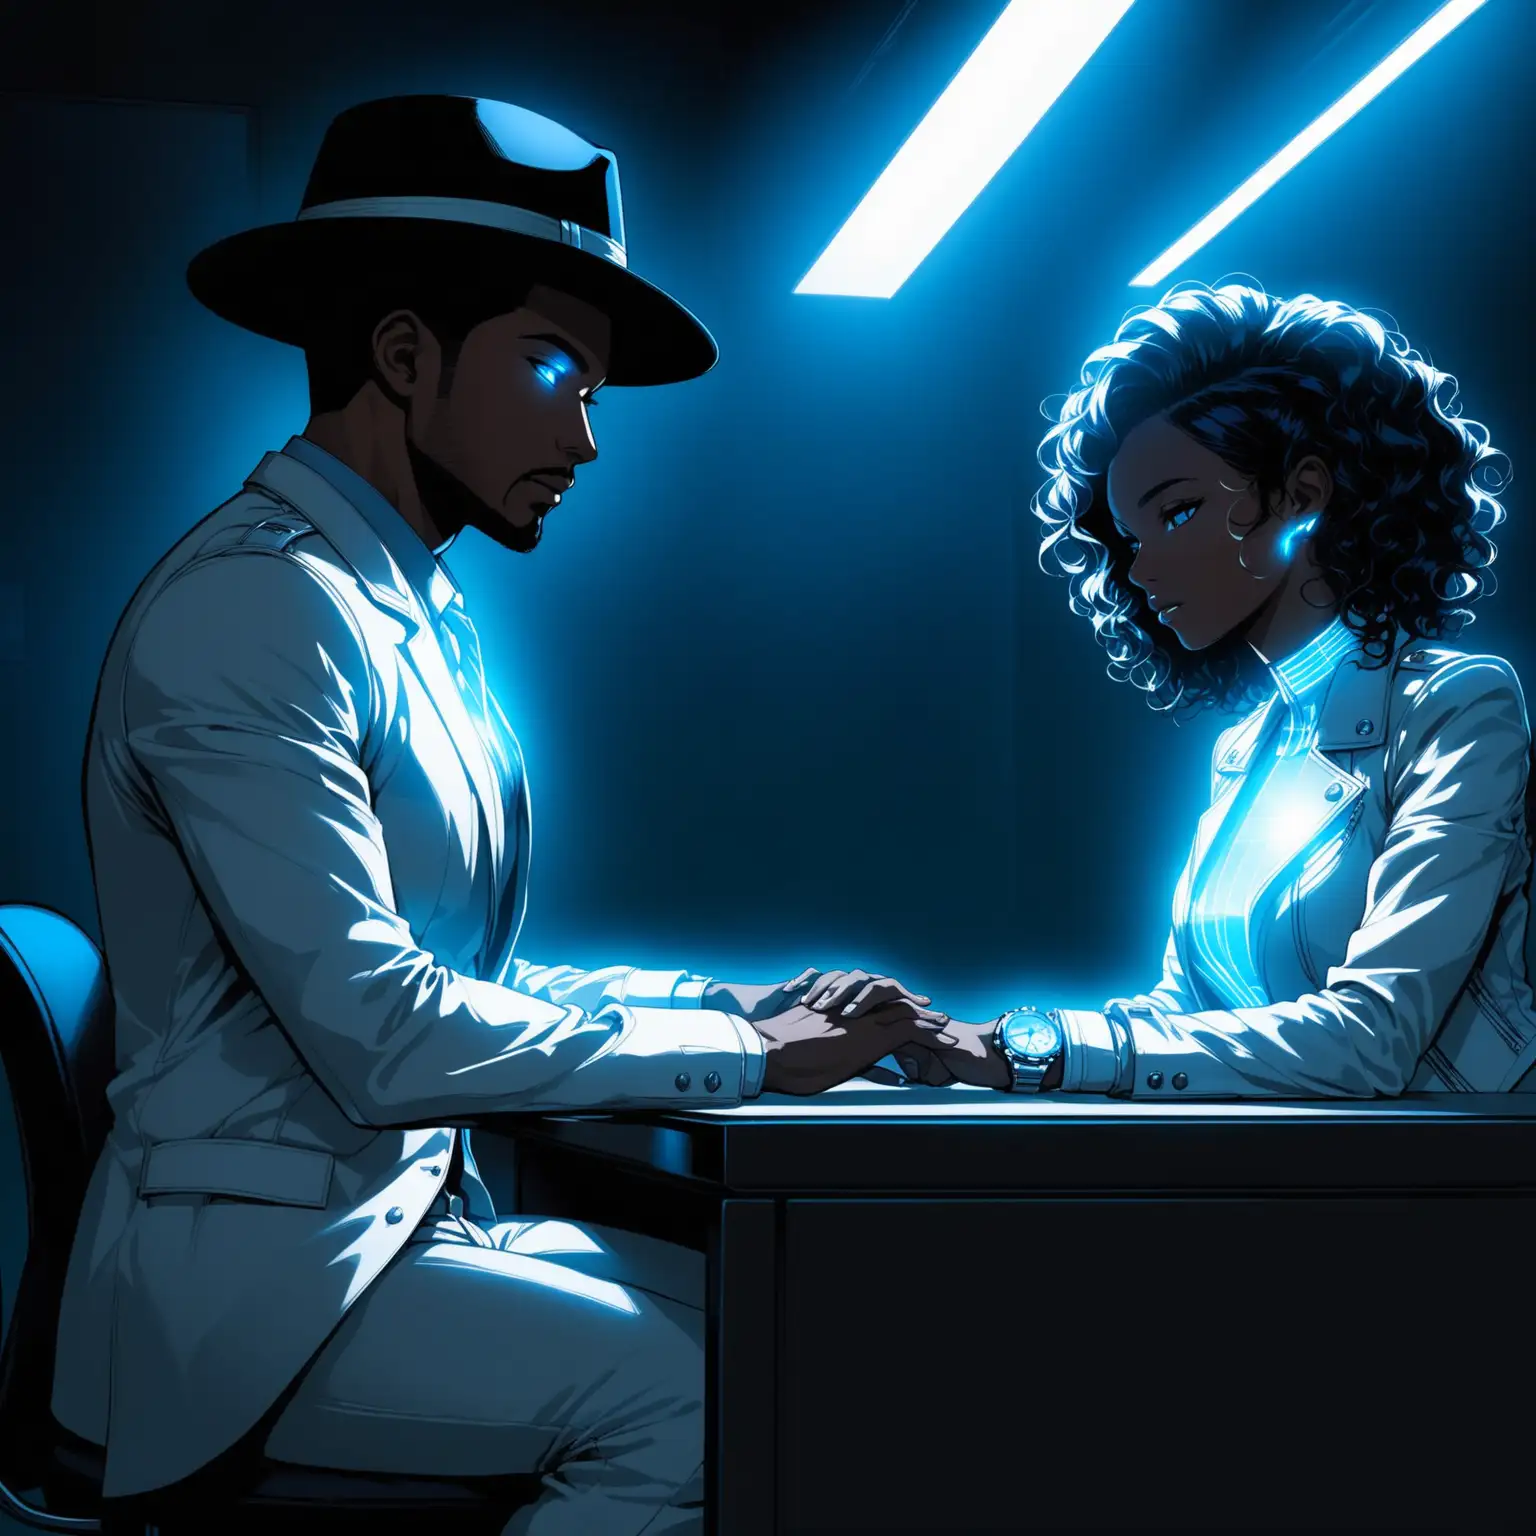 Futuristic Business Exchange African American Woman and Latino Man in Dark Office